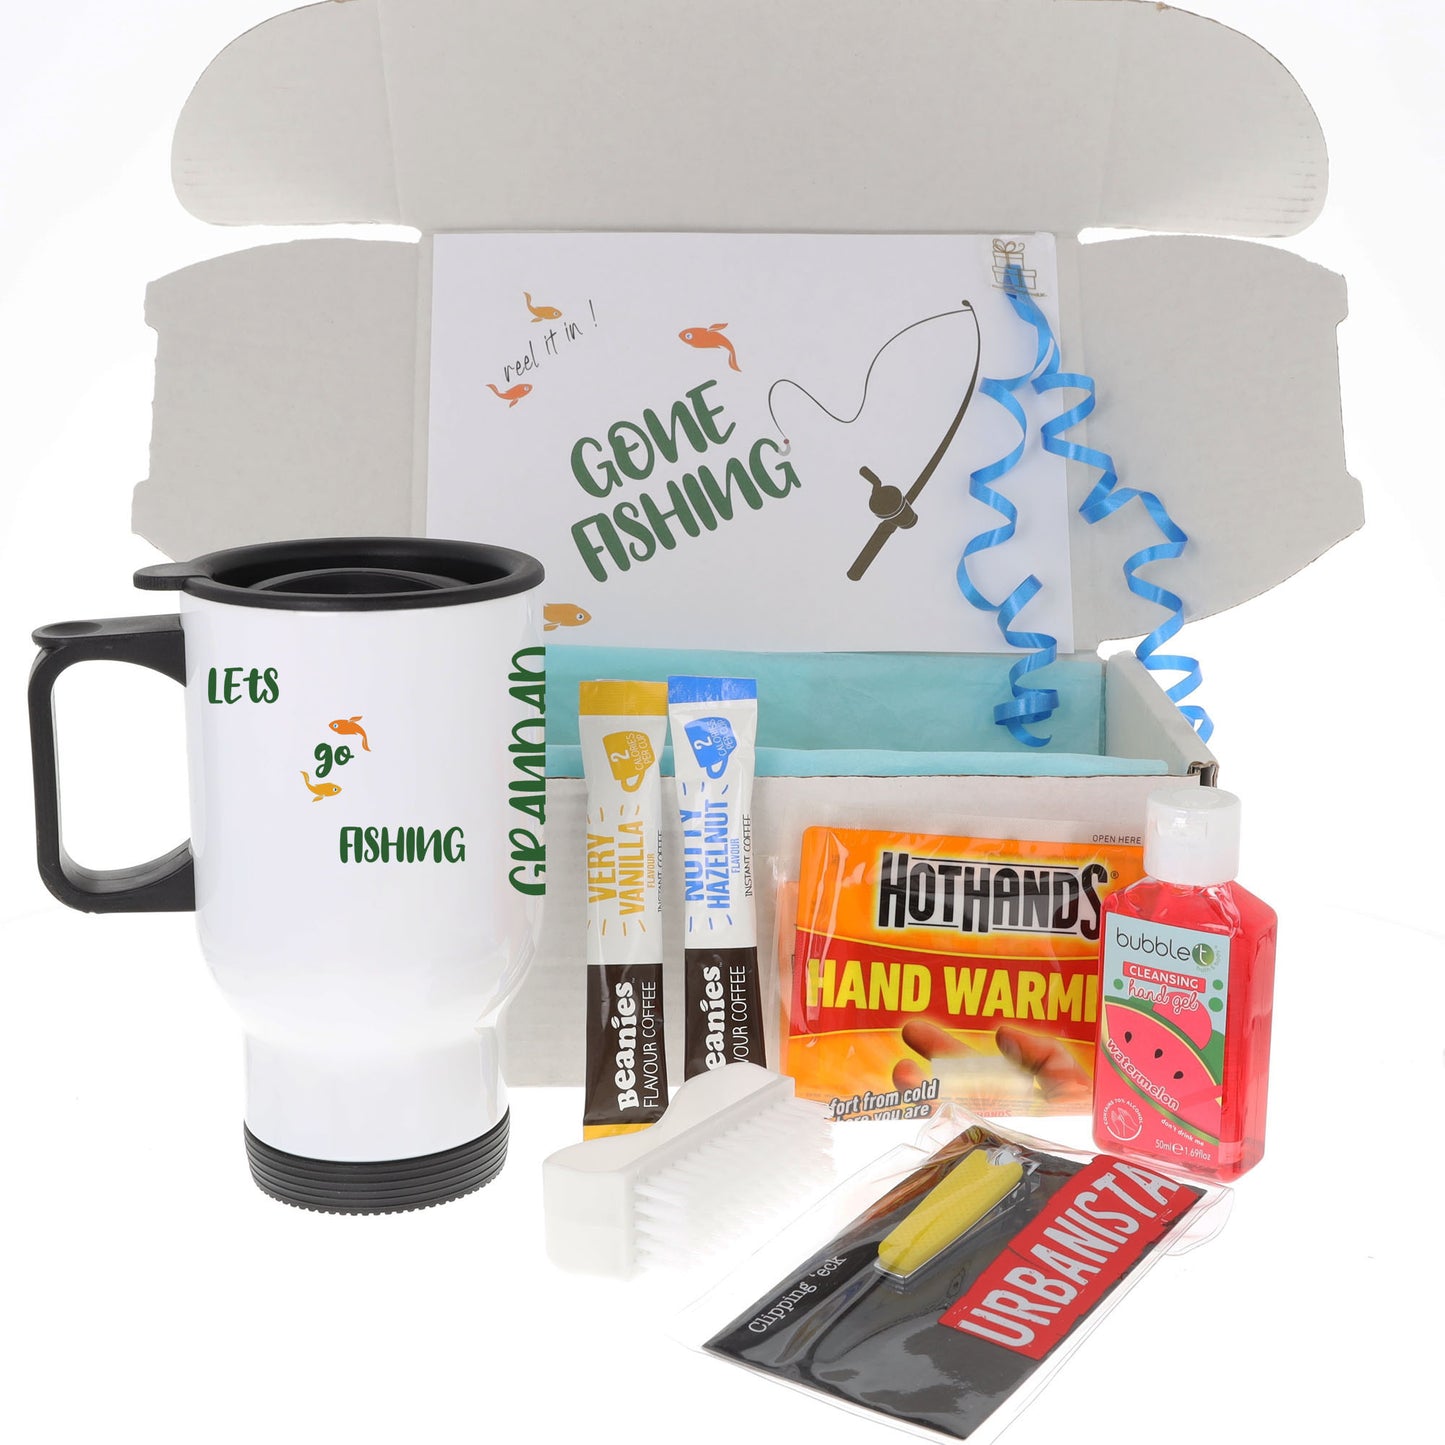 Personalised Sublimated Fishing Flask Gift  - Always Looking Good - Travel Mug Set With Coffee  